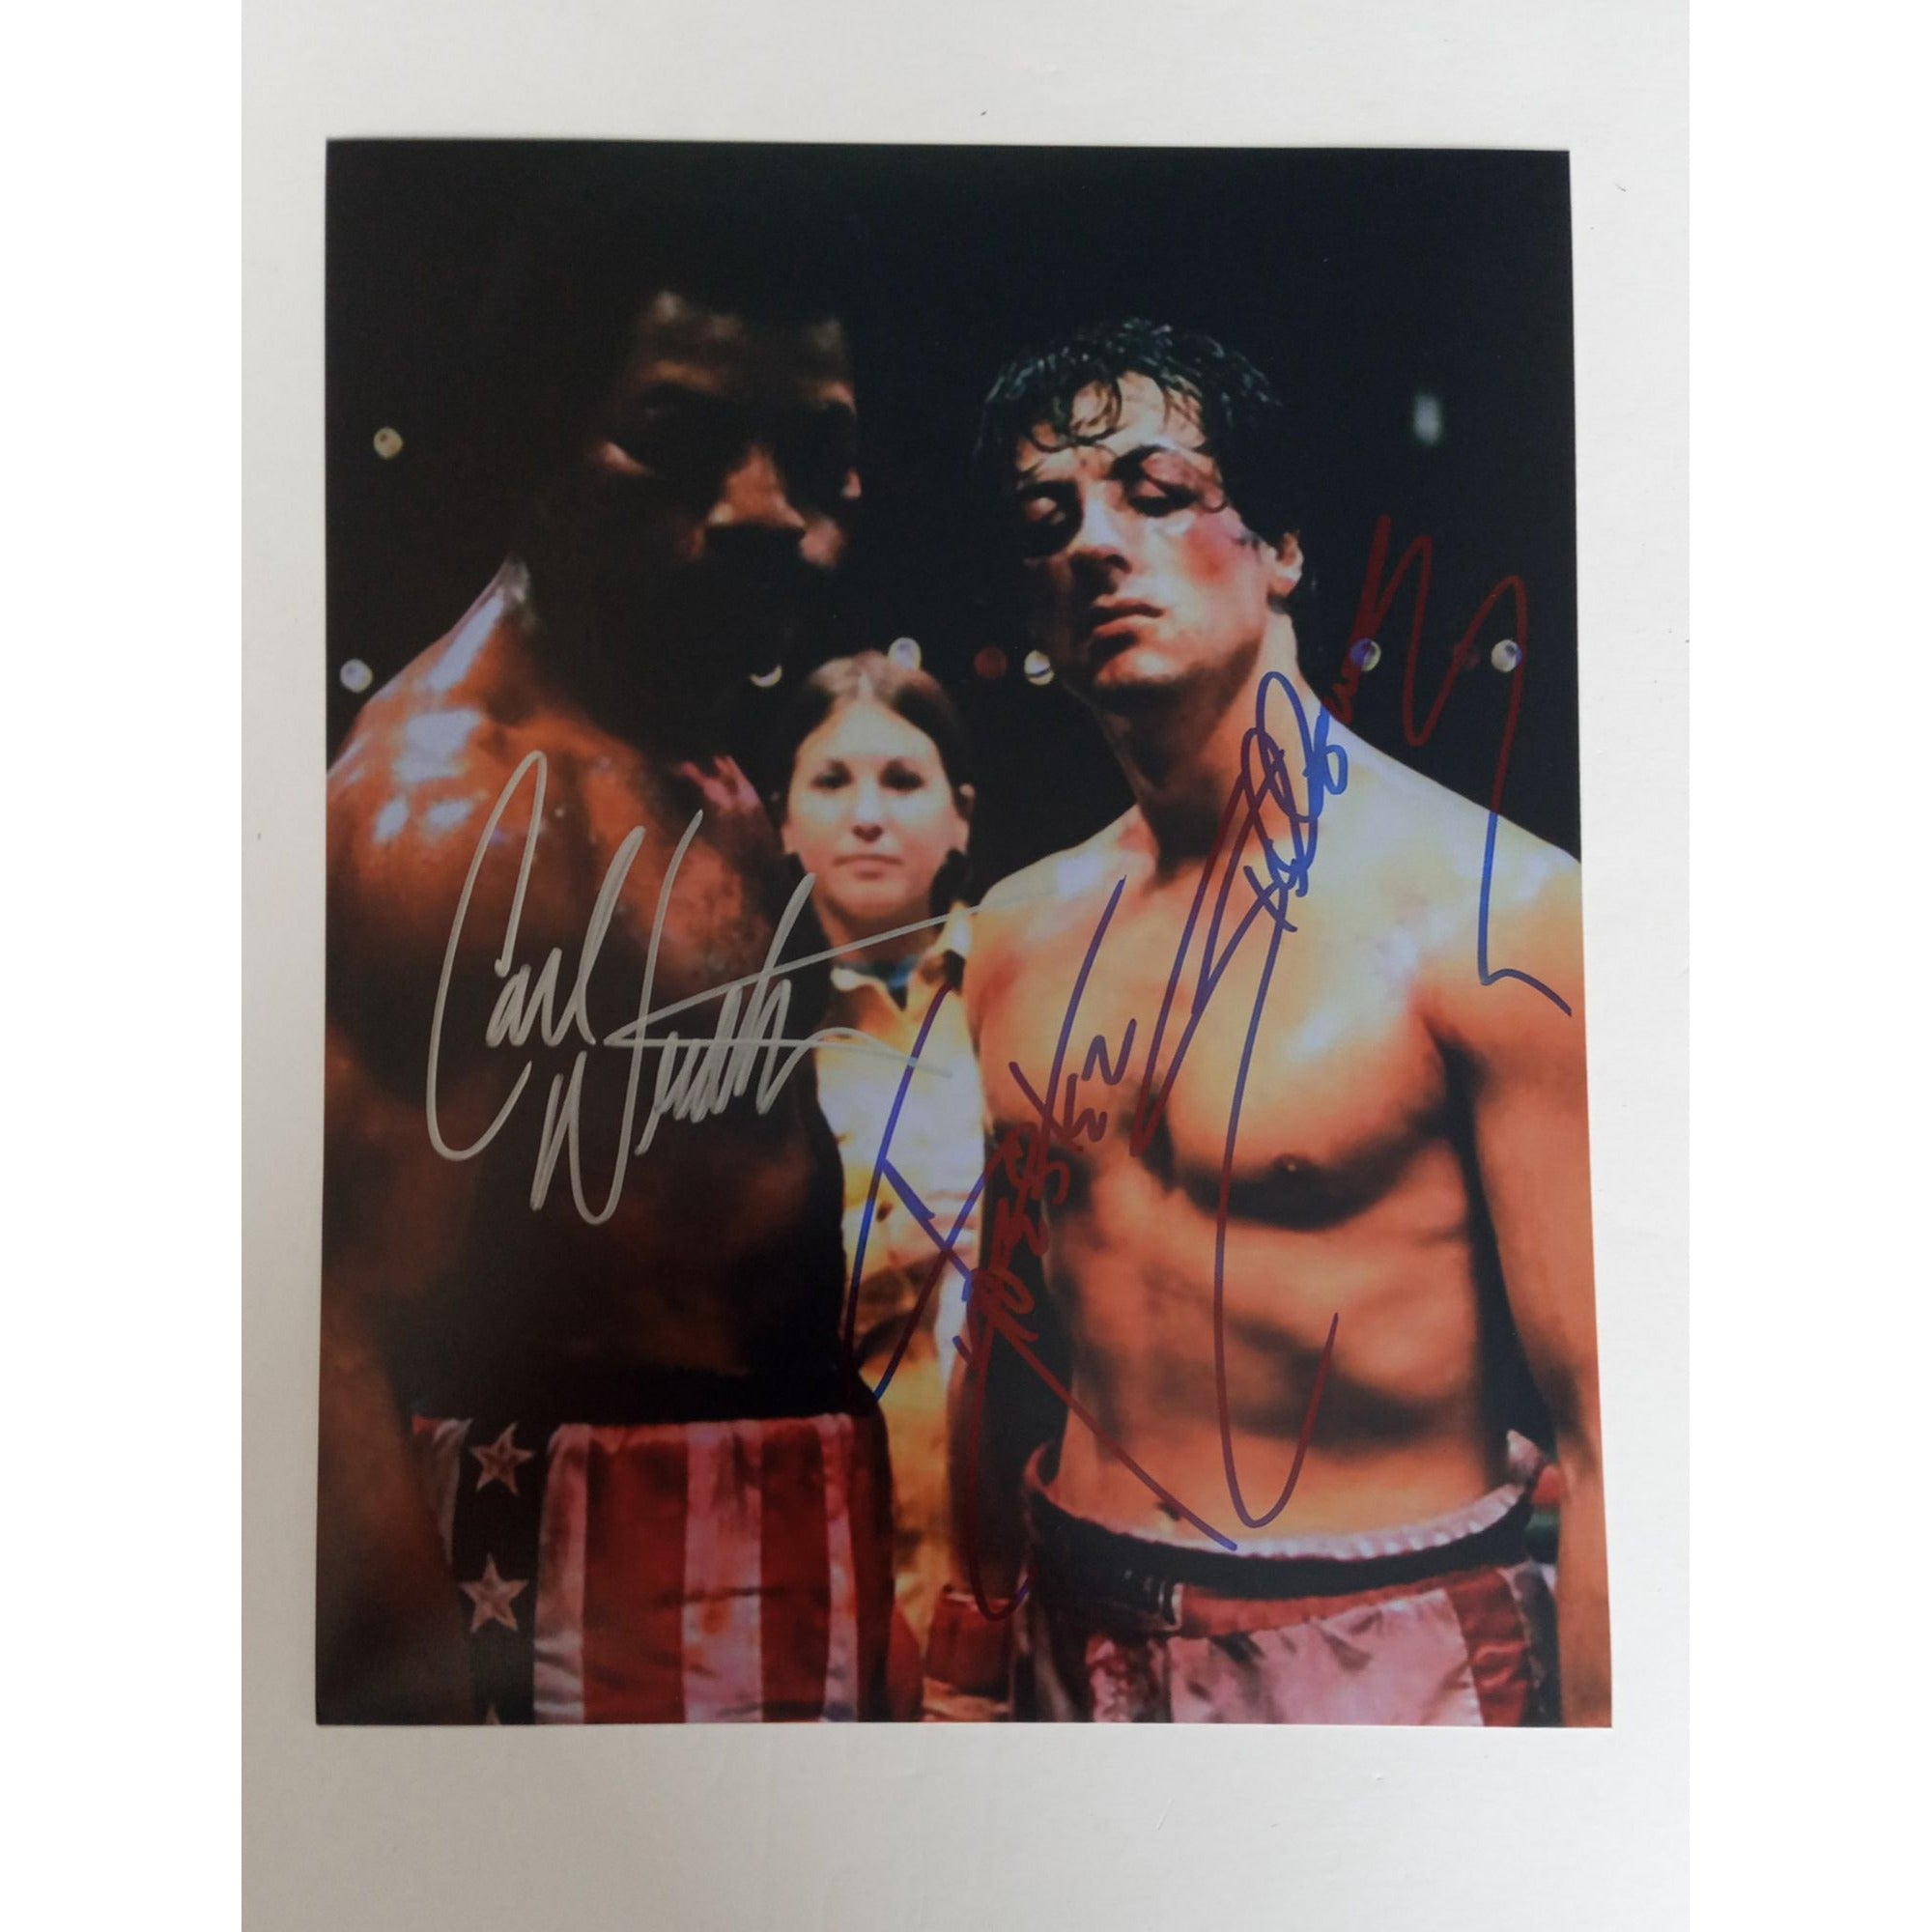 Rocky Balboa, Sylvester Stallone, Apollo Creed, Carl Weathers 8 x 10 signed photo with proof